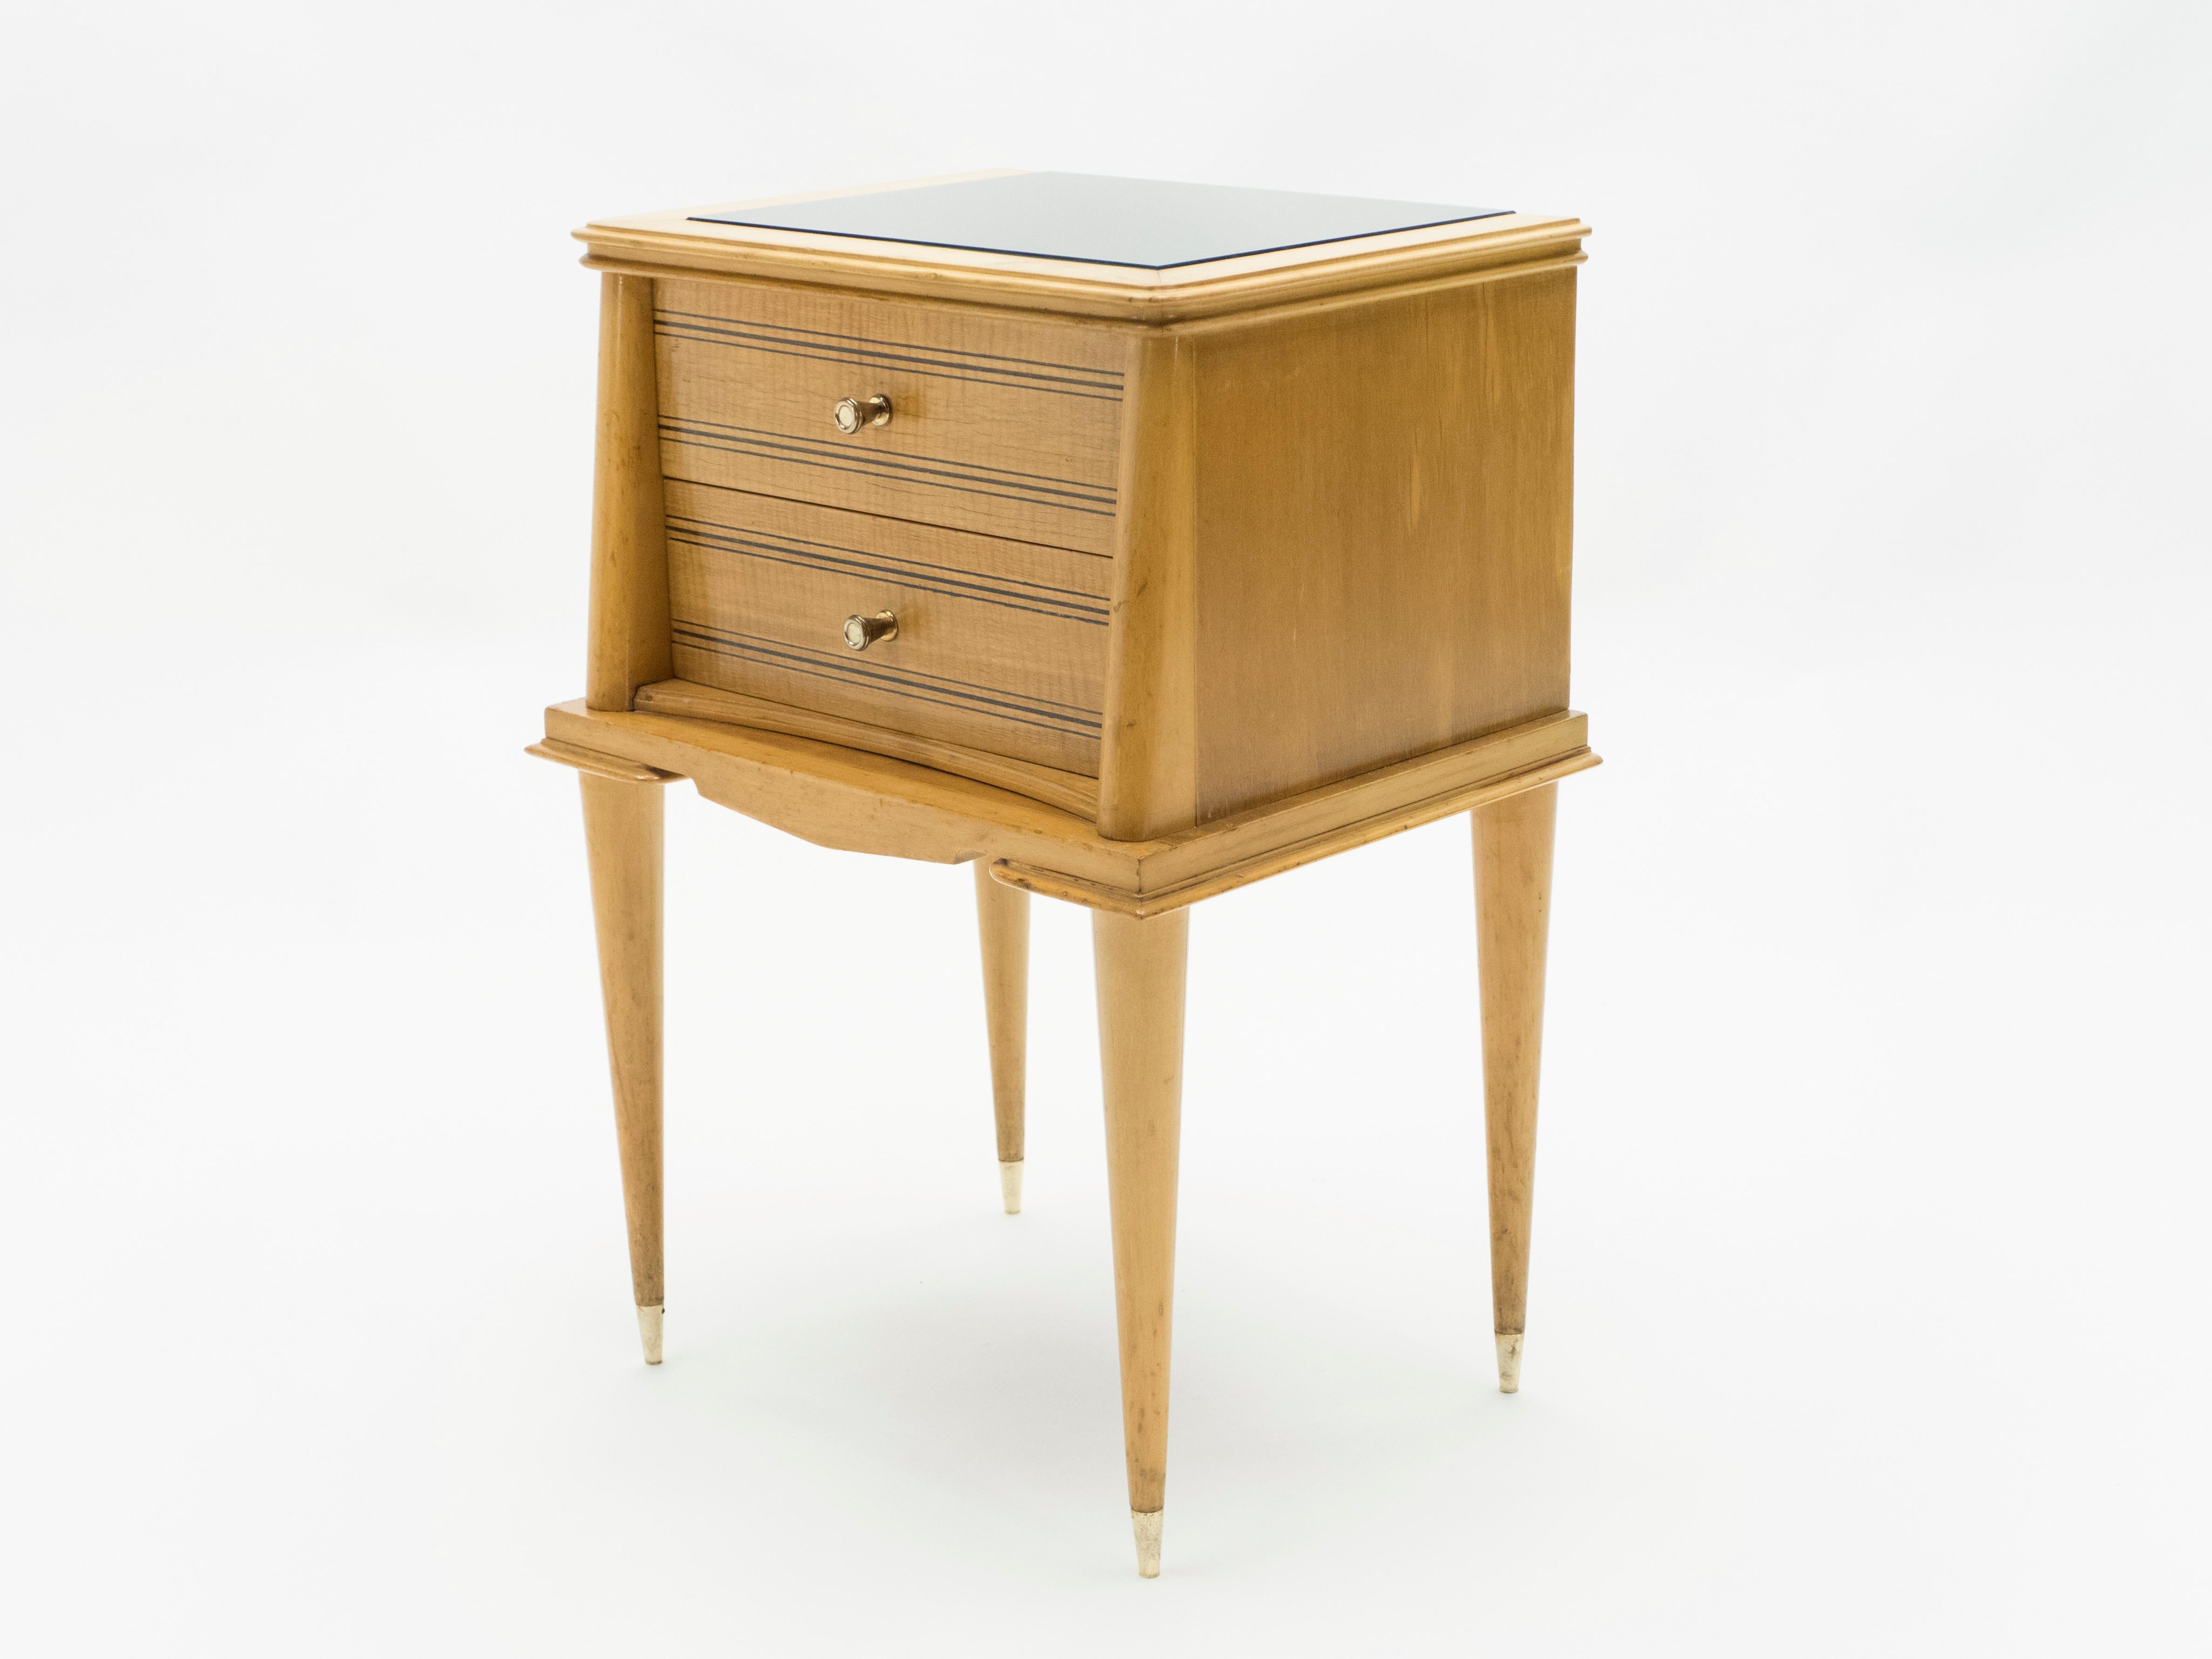 French Sycamore Nightstands 2 Drawers Attributed to Suzanne Guiguichon, 1950s For Sale 8